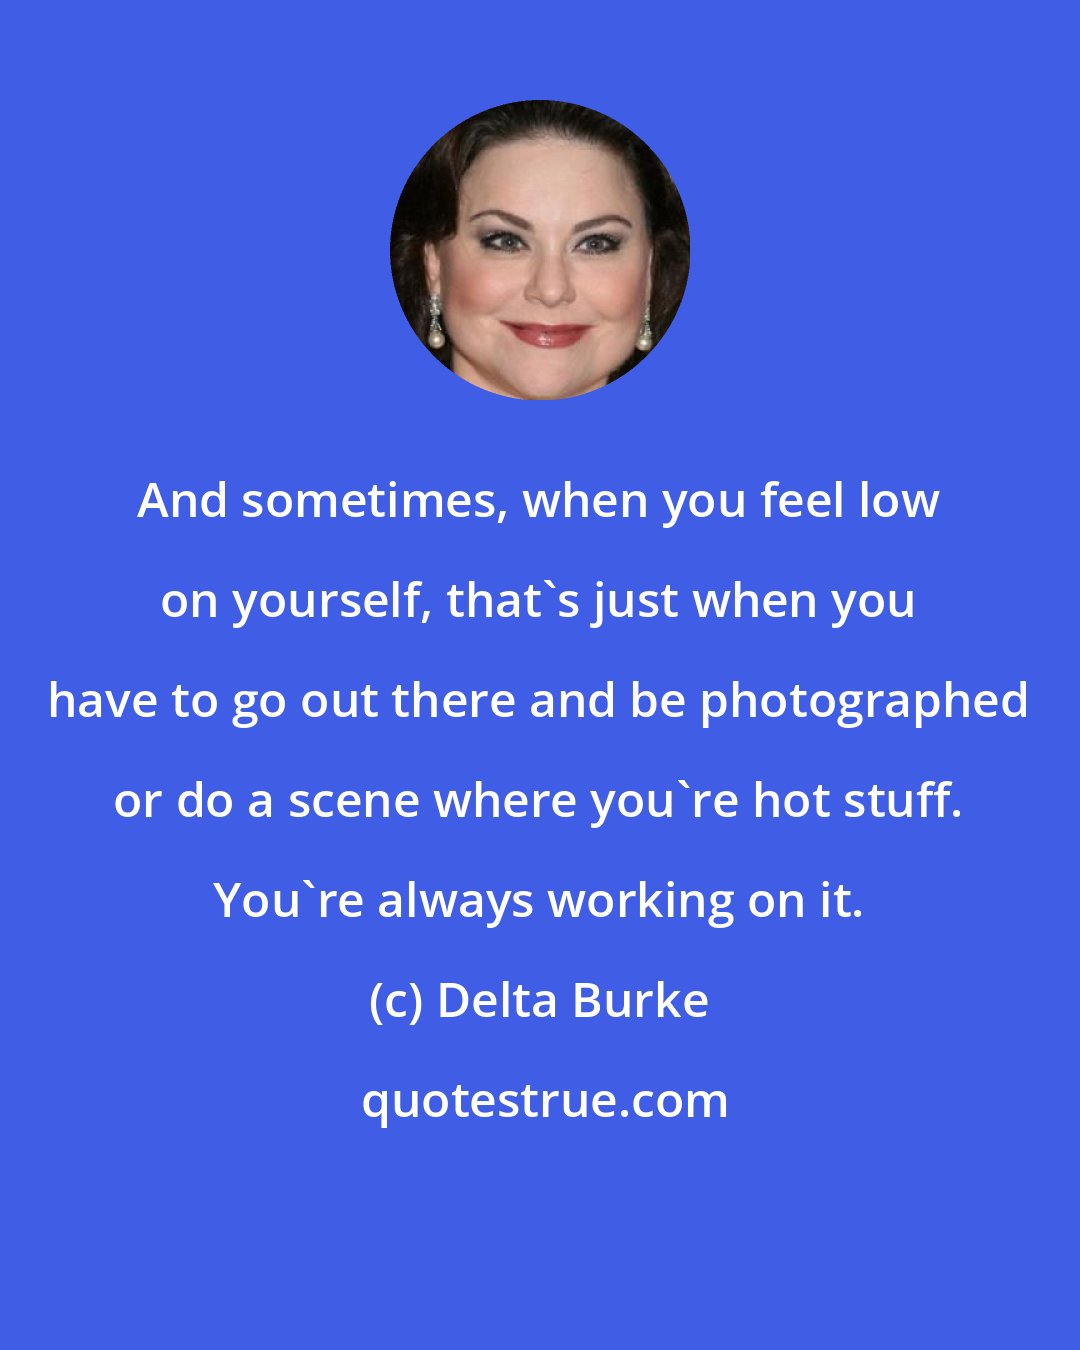 Delta Burke: And sometimes, when you feel low on yourself, that's just when you have to go out there and be photographed or do a scene where you're hot stuff. You're always working on it.